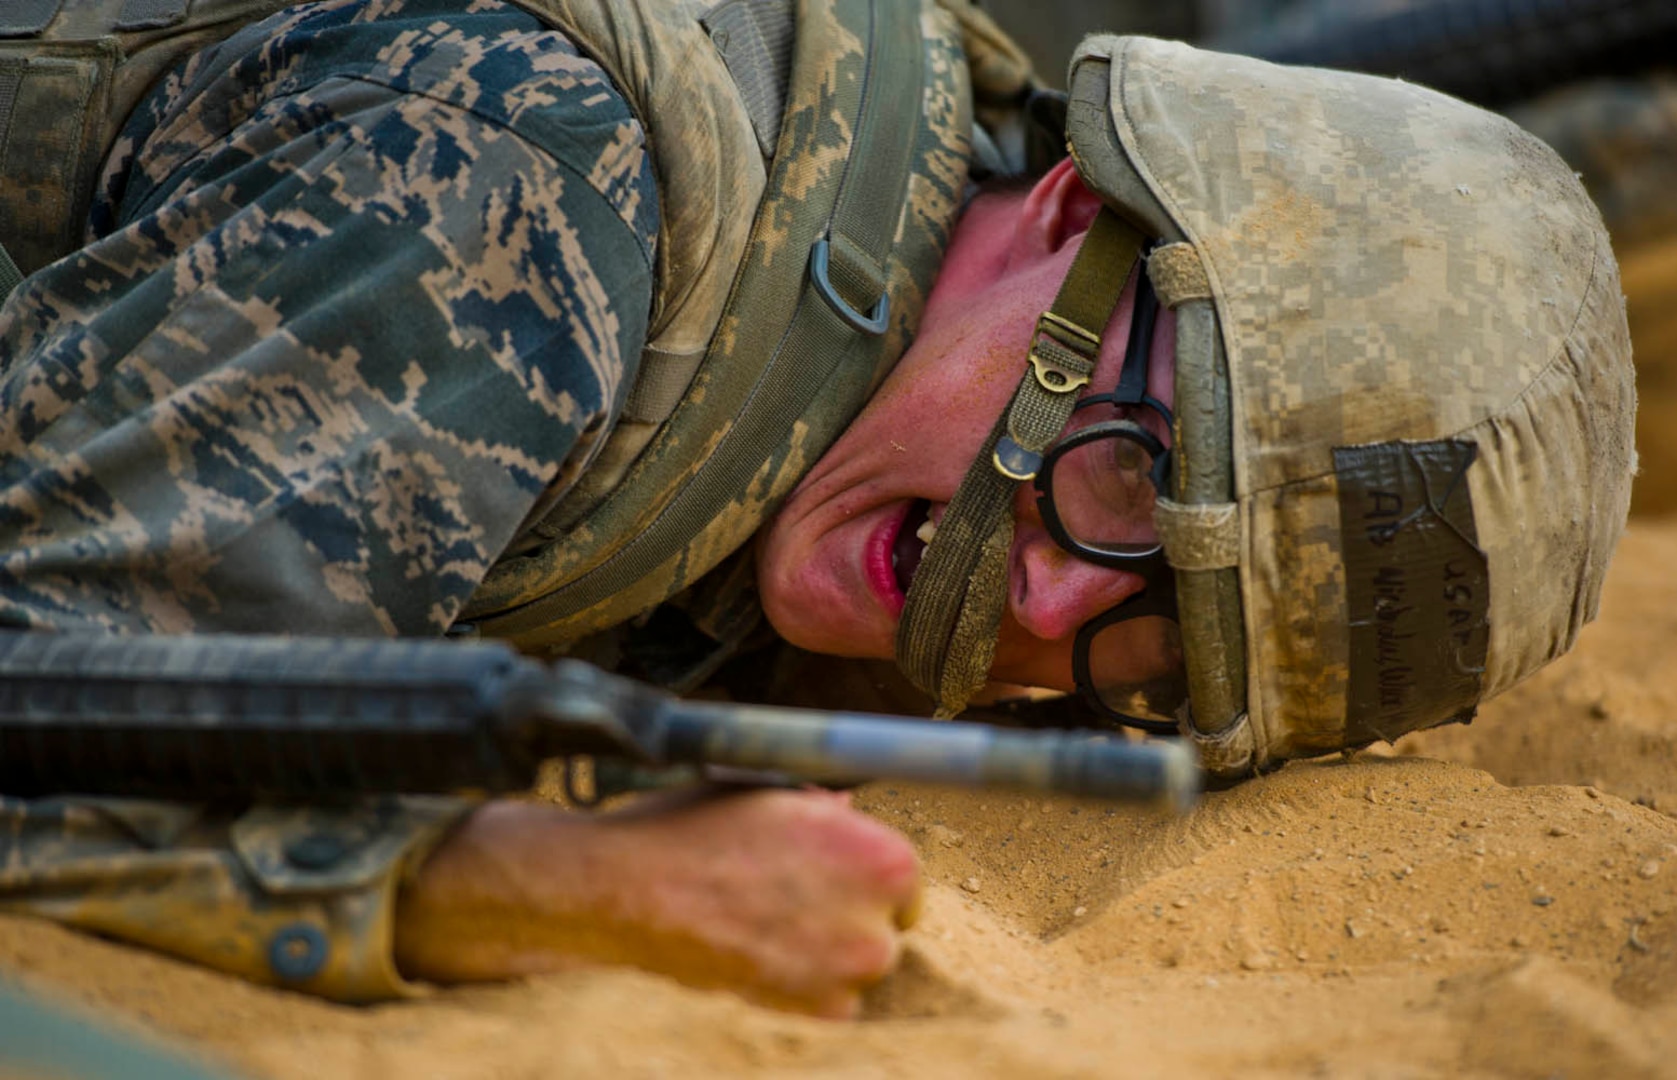 Air Force basic military trainee Nicholas Warila, 322nd Training Squadron, Flight 533, low crawls through an obstacle course during the Creating Leaders, Airmen and Warriors (CLAW) course July 27 at Lackland Air Force Base. CLAW is a three-hour, mission-oriented exercise designed to test teamwork, leadership skills and the ability to perform under pressure. (U.S. Air Force photo/Senior Airman Marleah Miller)